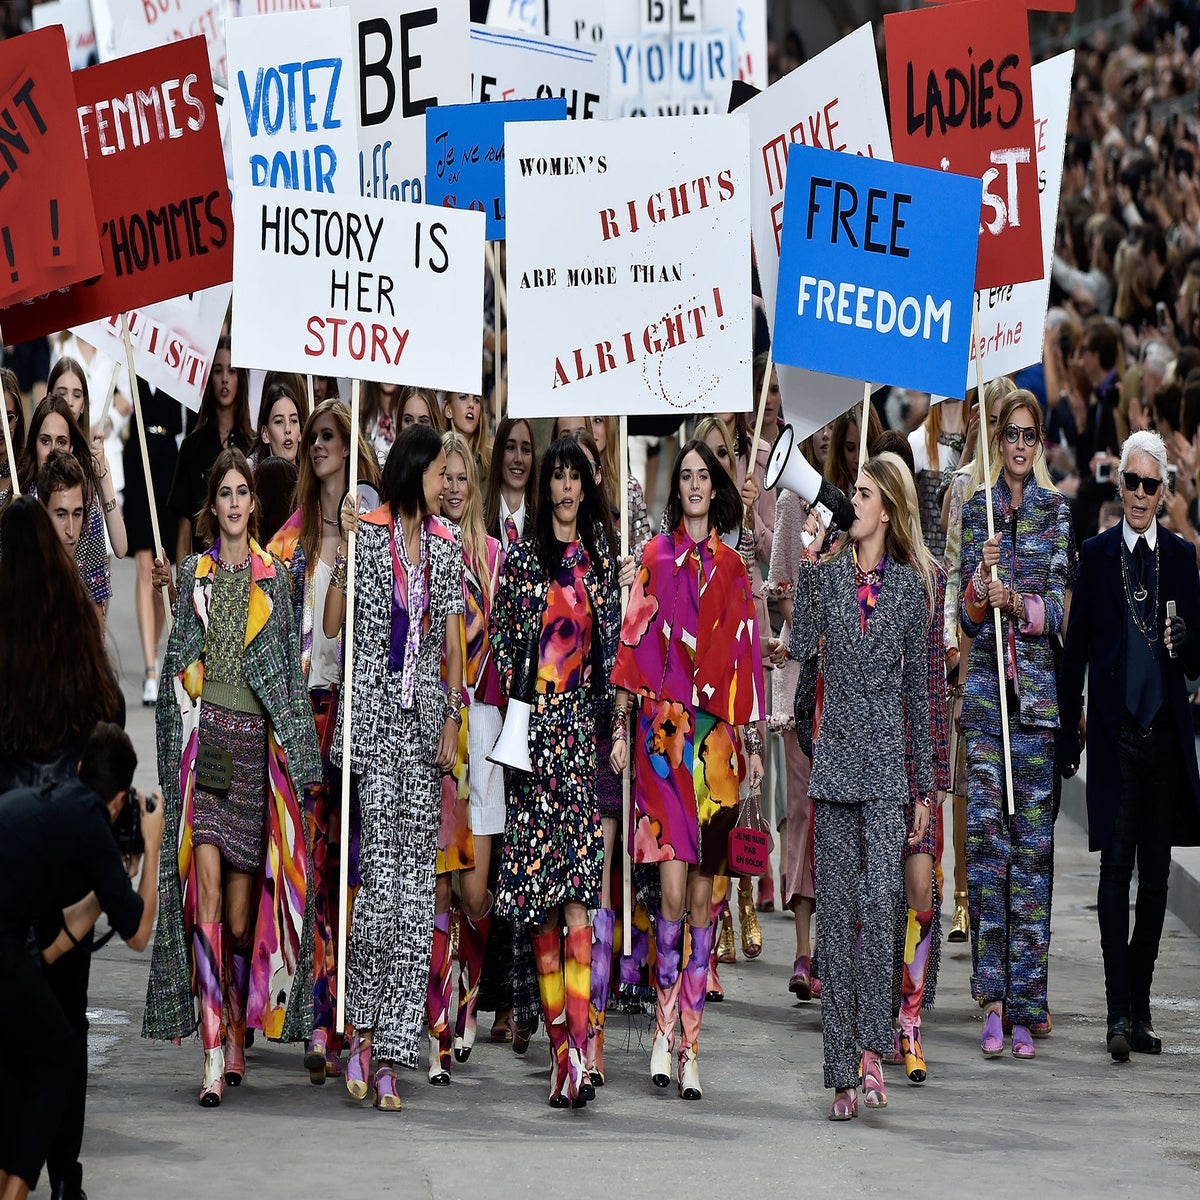 Dare to be a feminist fashionista: why I love Karl Lagerfeld's fashion riot.